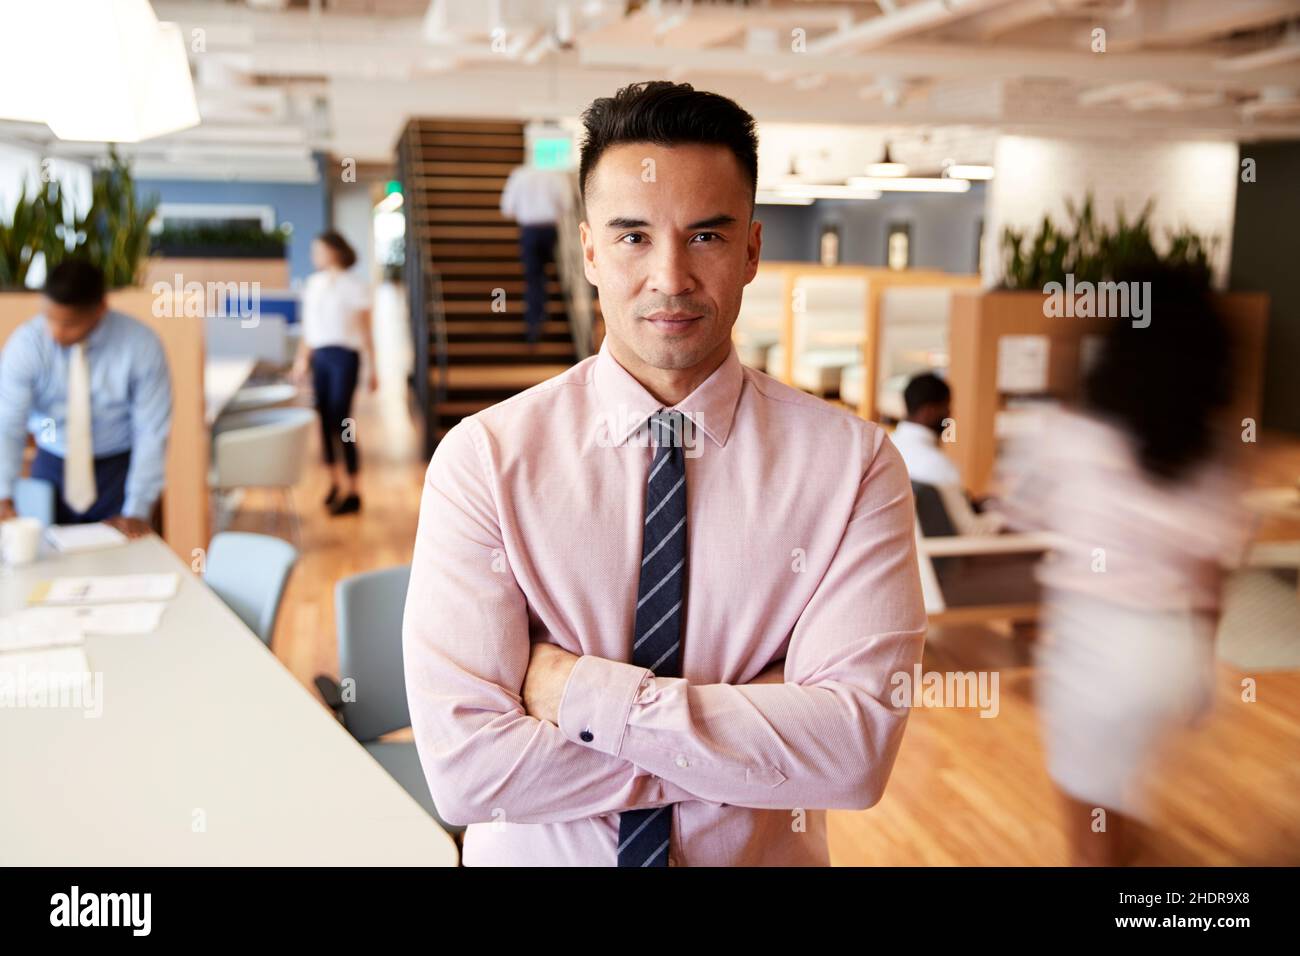 businessman, office, focussed, boss, businessmen, executive, executives, leader, leaders, manager, offices, focusseds Stock Photo